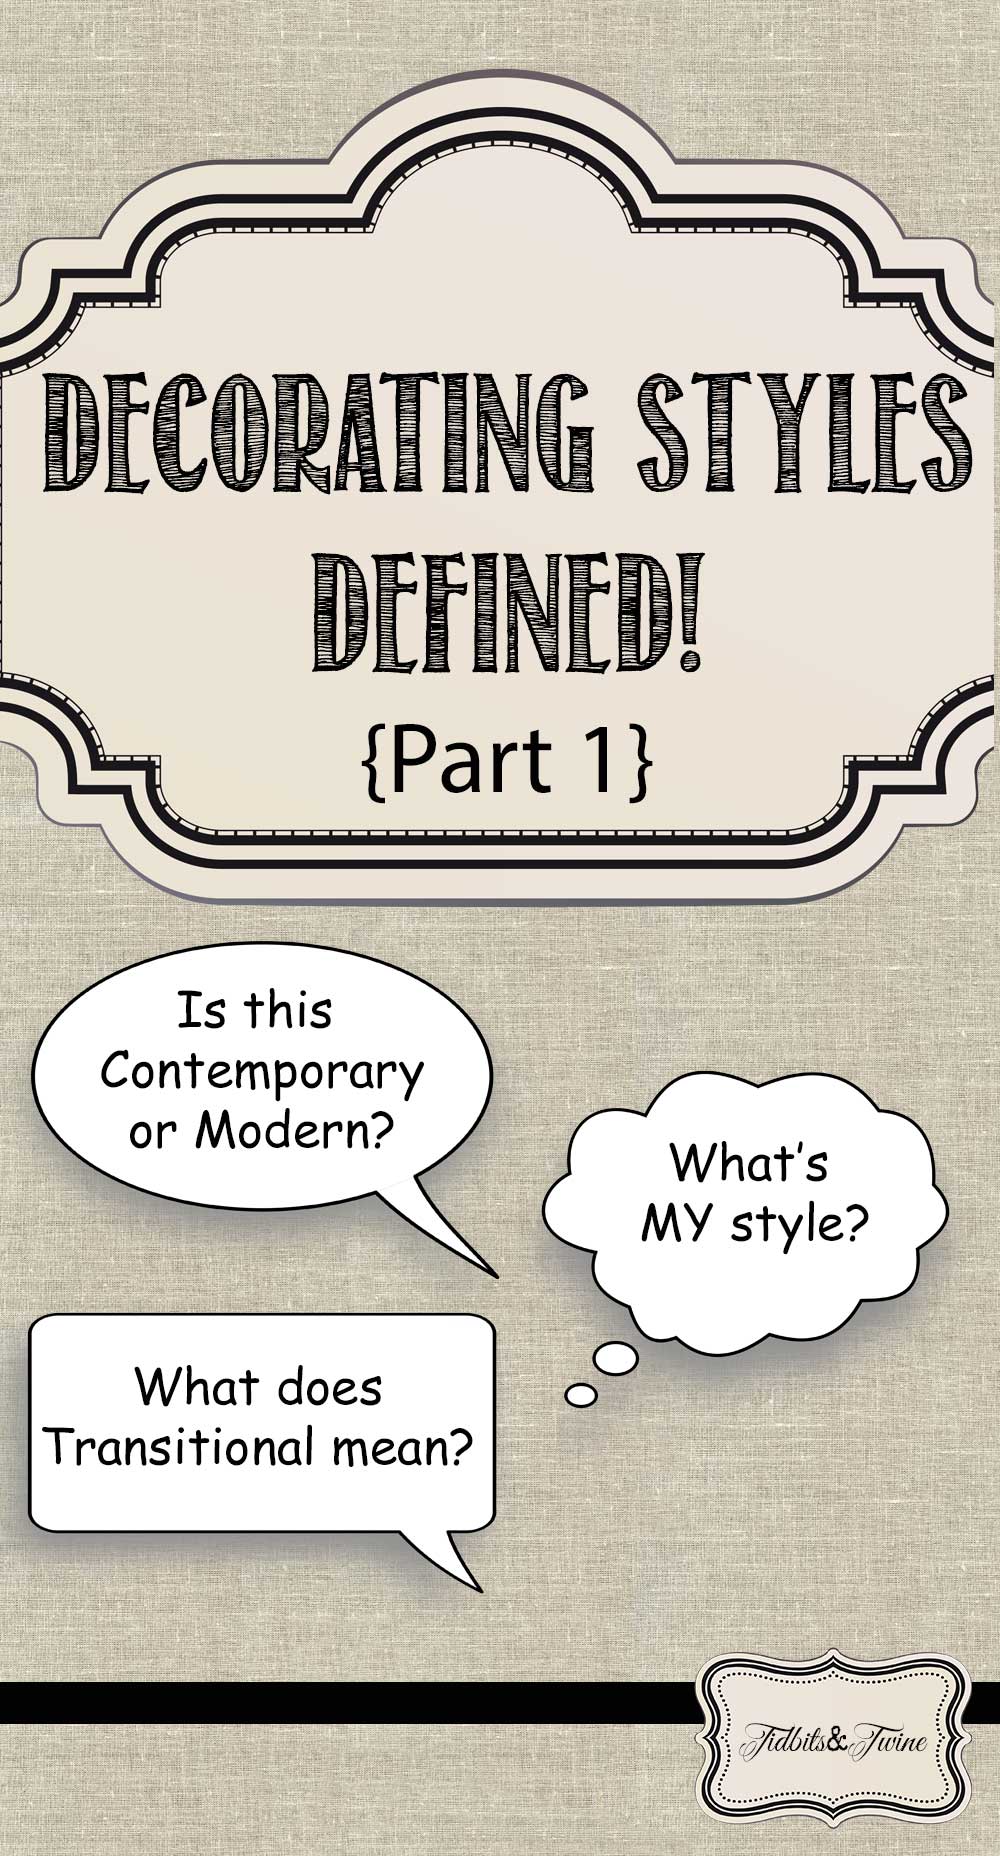 TIDBITS&TWINE - Decorating Styles Defined Part 1: What is Traditional, Contemporary, and Transitional